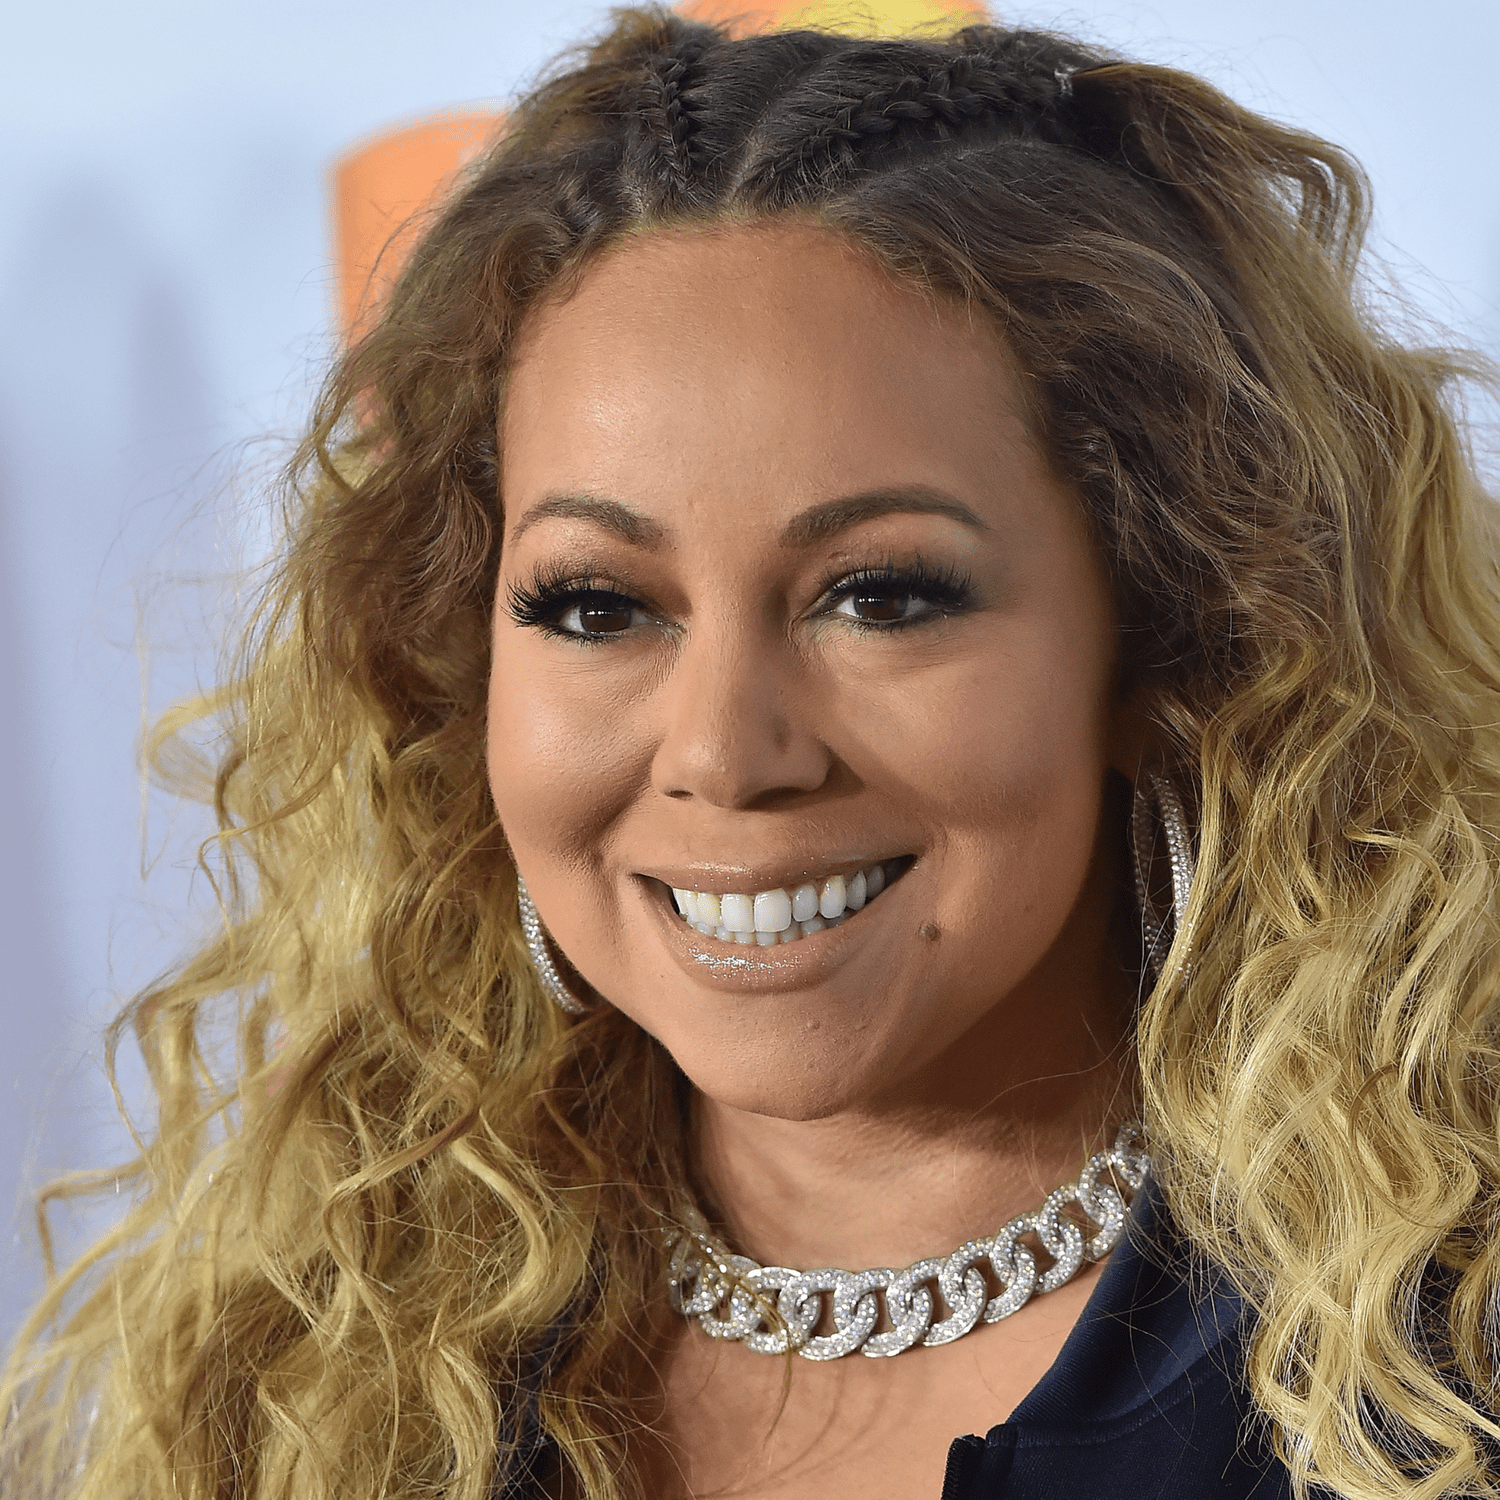 Mariah Carey wearing long curly hair with feed in braids hairstyle